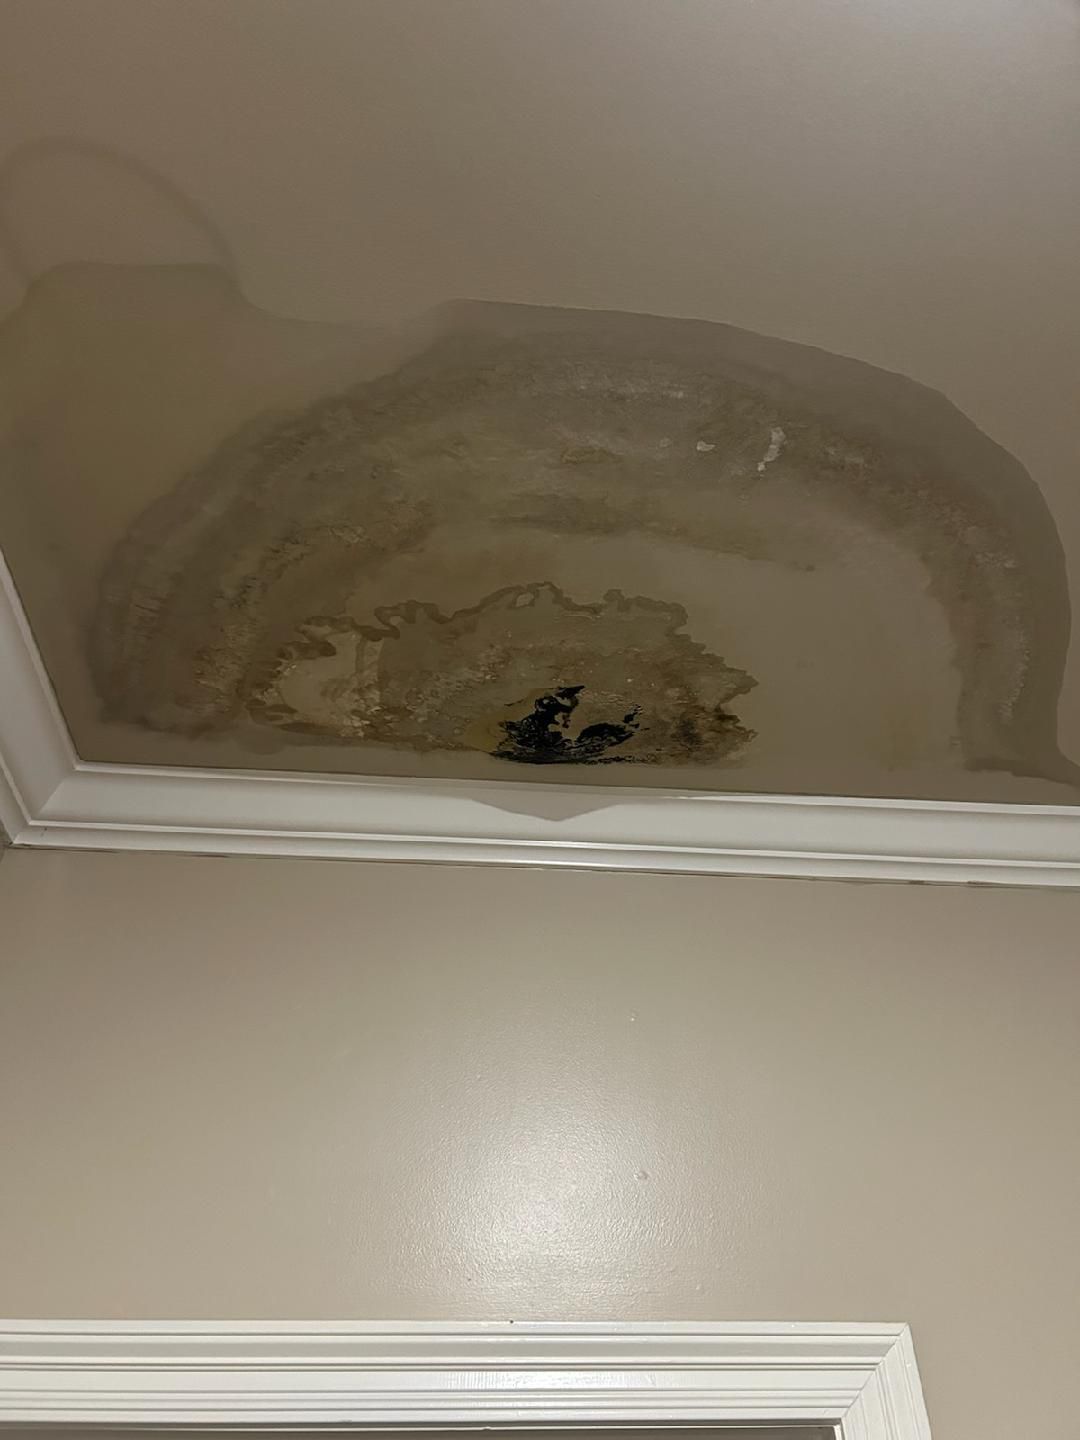 Youngsville water heater leaks in attic, repaired. 